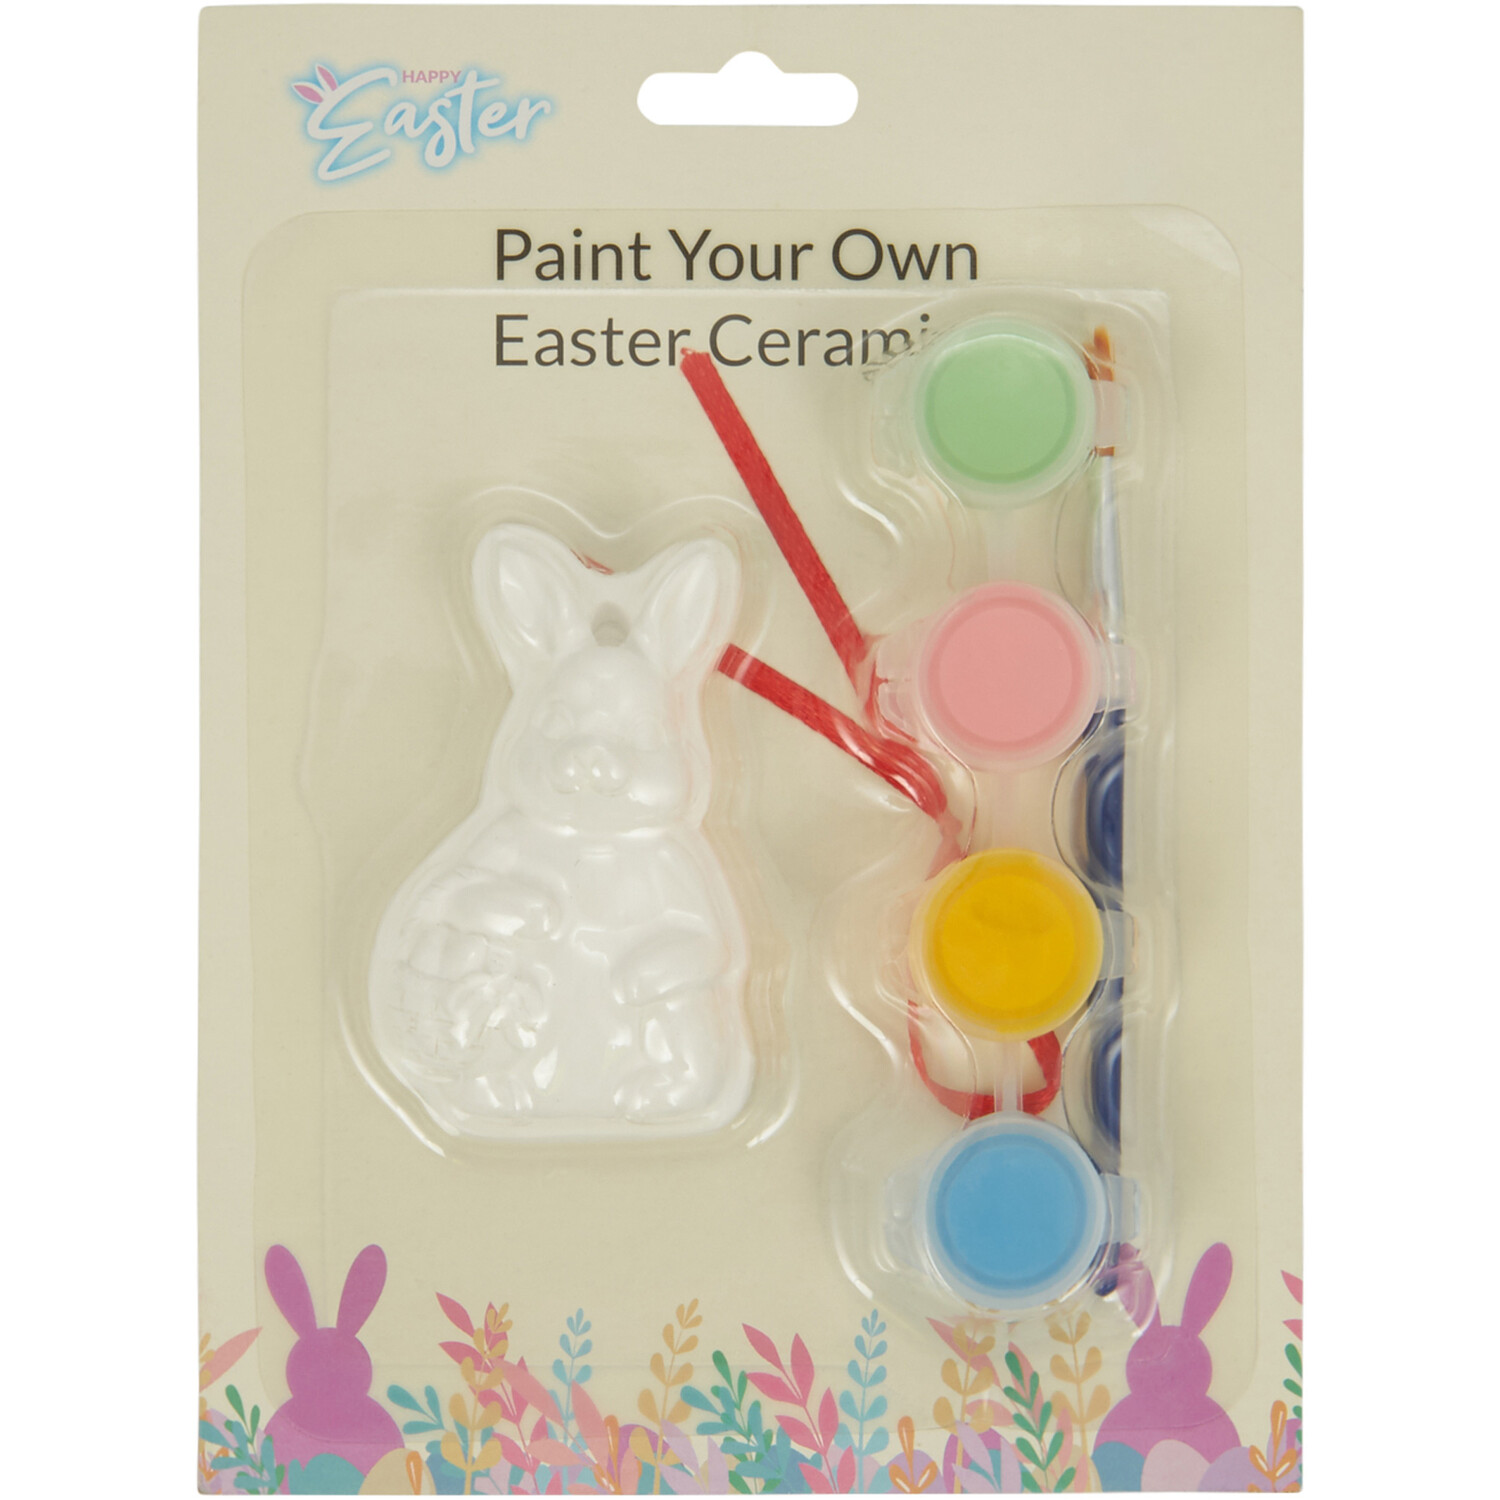 Happy Easter Paint Your Own Easter Ceramics Set Image 3